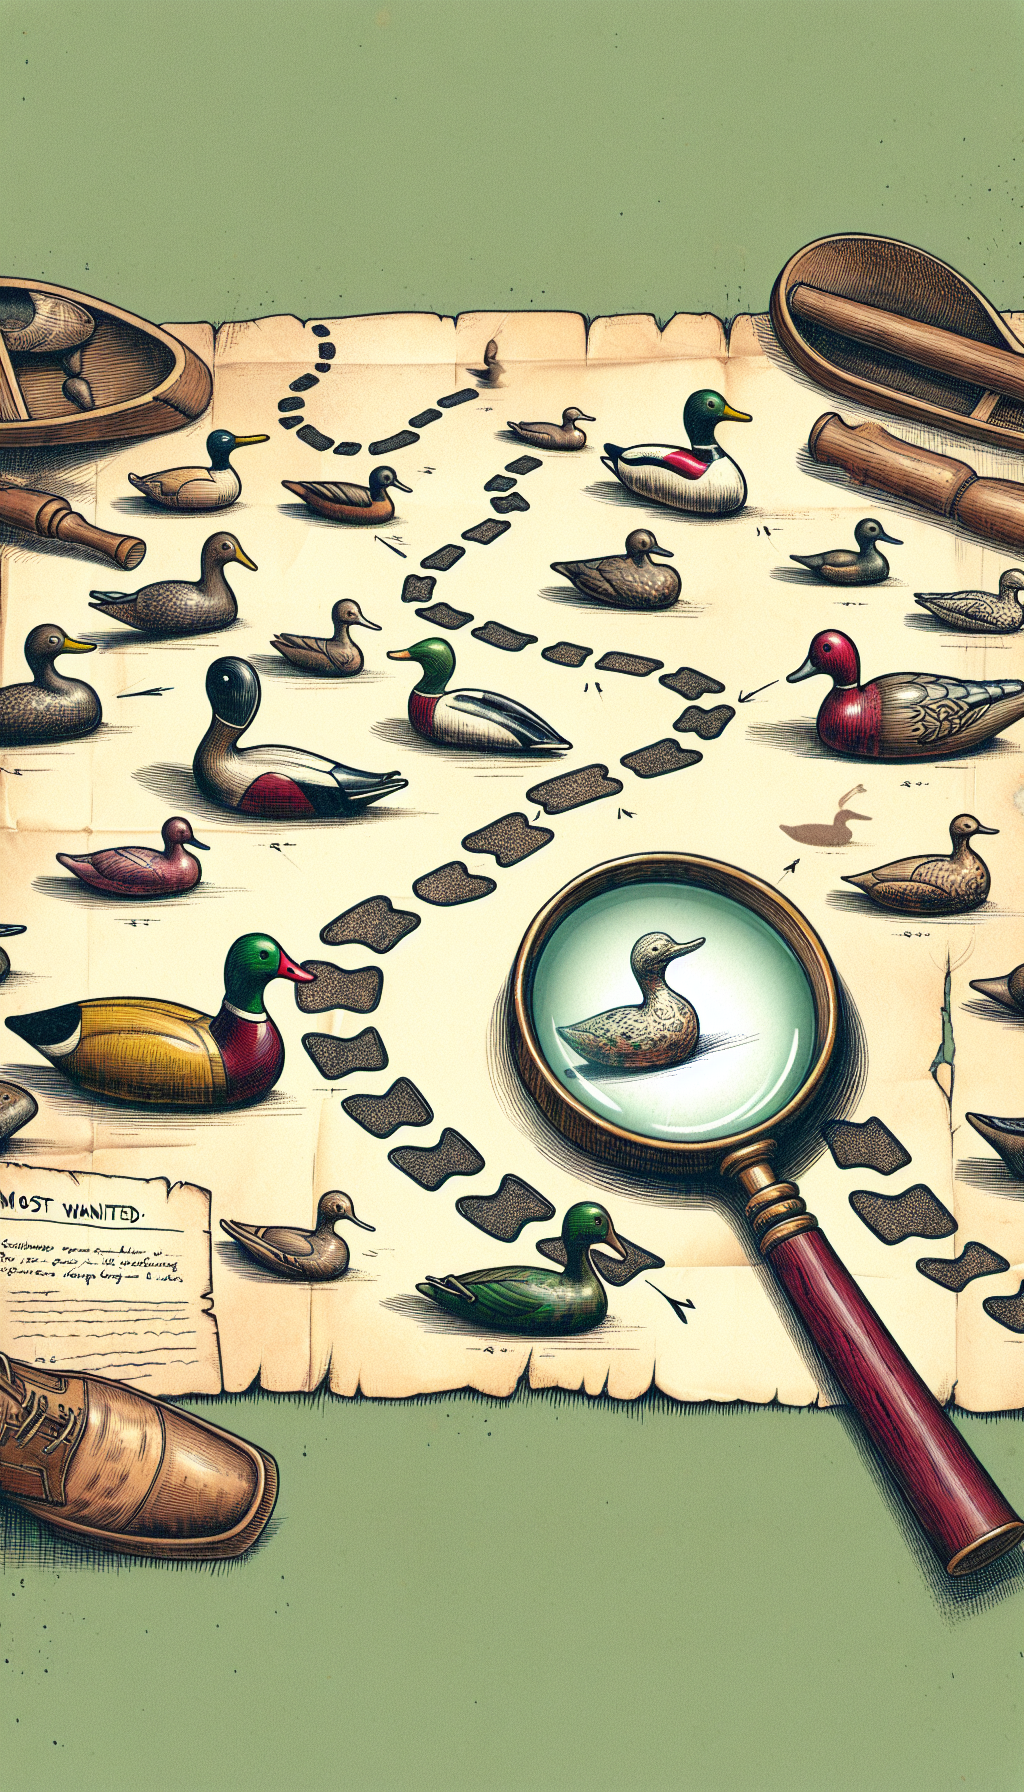 An illustration depicting an antique shop themed treasure map, with a pathway of footsteps winding among a scattering of various whimsical, vintage styled duck decoys. At pathway's end sits a magnifying glass highlighting a rare, 'most wanted' decoy, signifying the investment gem. The decoys gradually transition from sketchy outlines to detailed, colorful representations to denote the identification process.